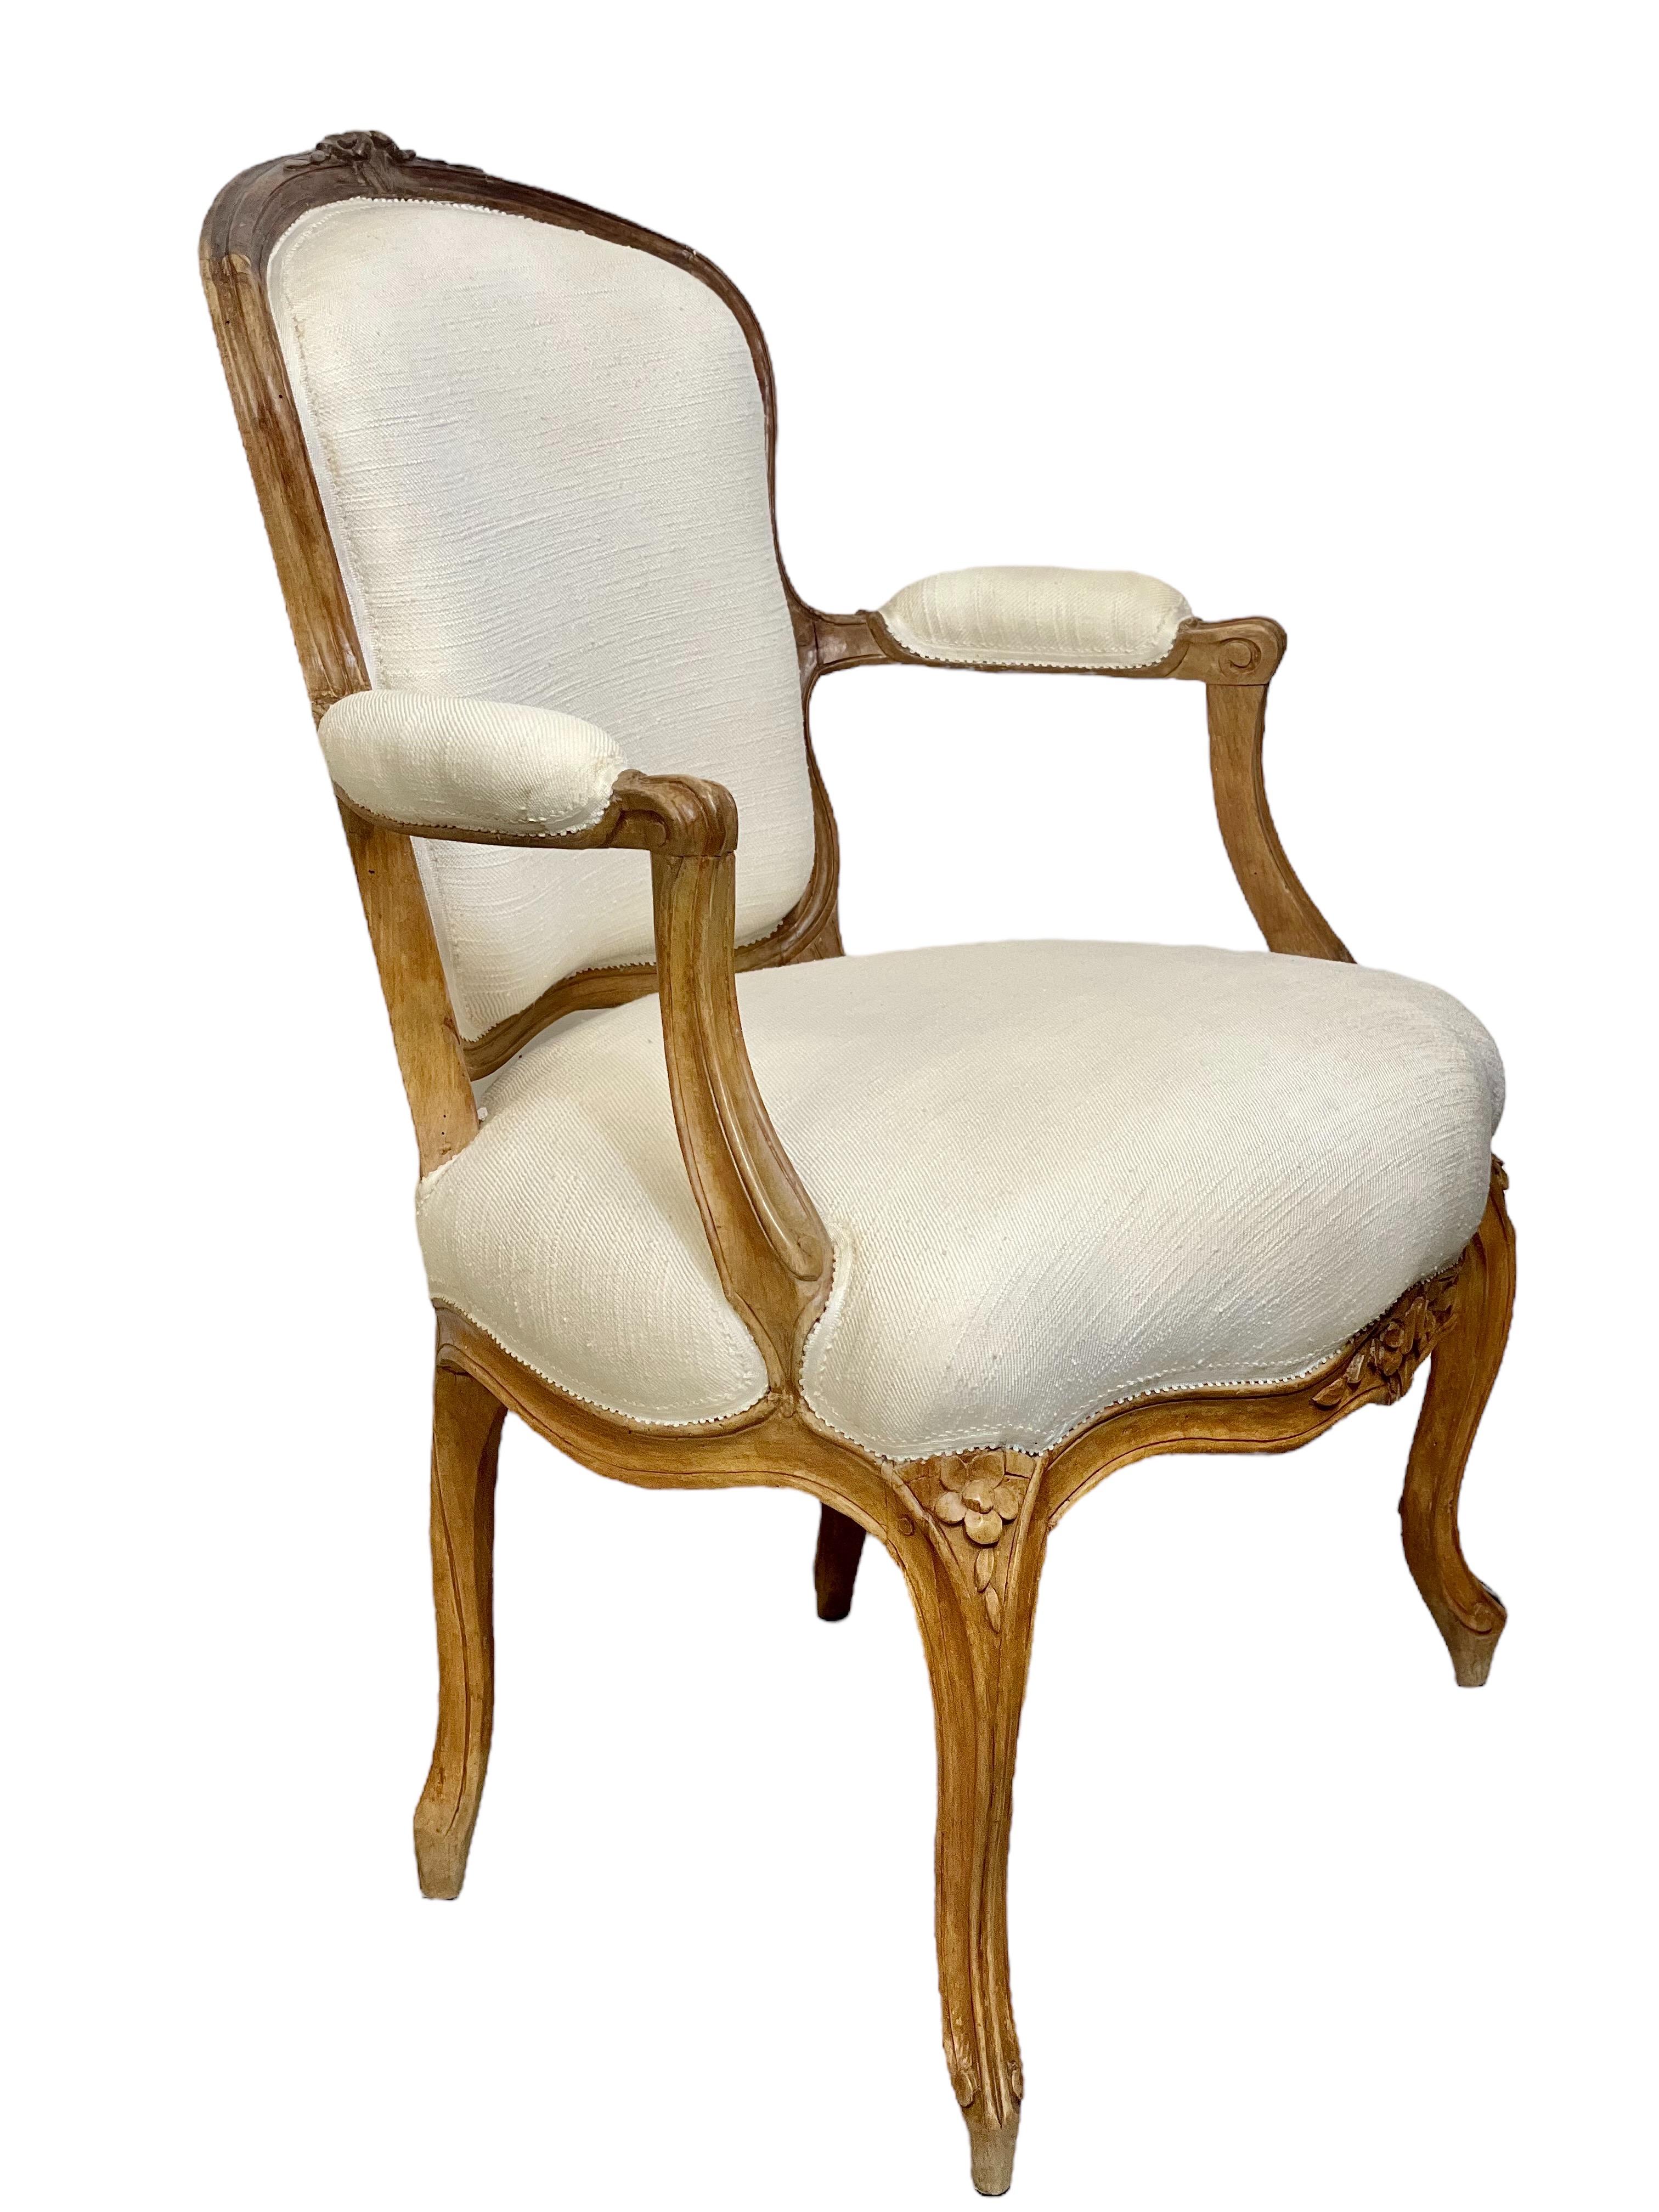 Régence Louis XV Period Pair of Walnut Cabriolets Armchairs, 18th Century For Sale